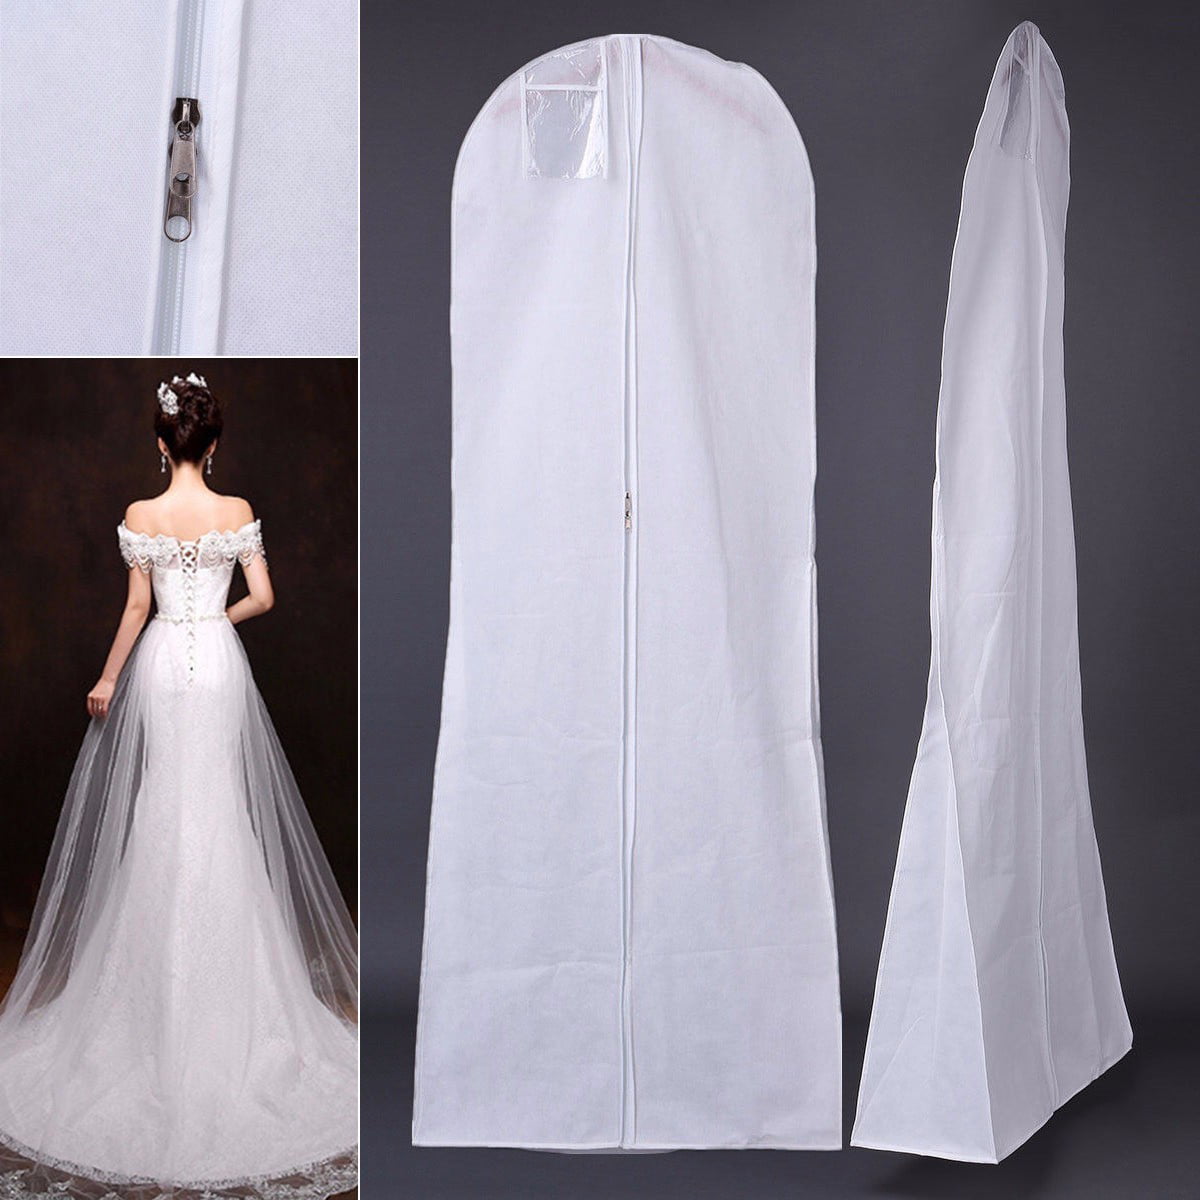 Hangerworld™ 72 in Breathable Lilac Wedding Dress Cover Gown Garment Clothes Bag 